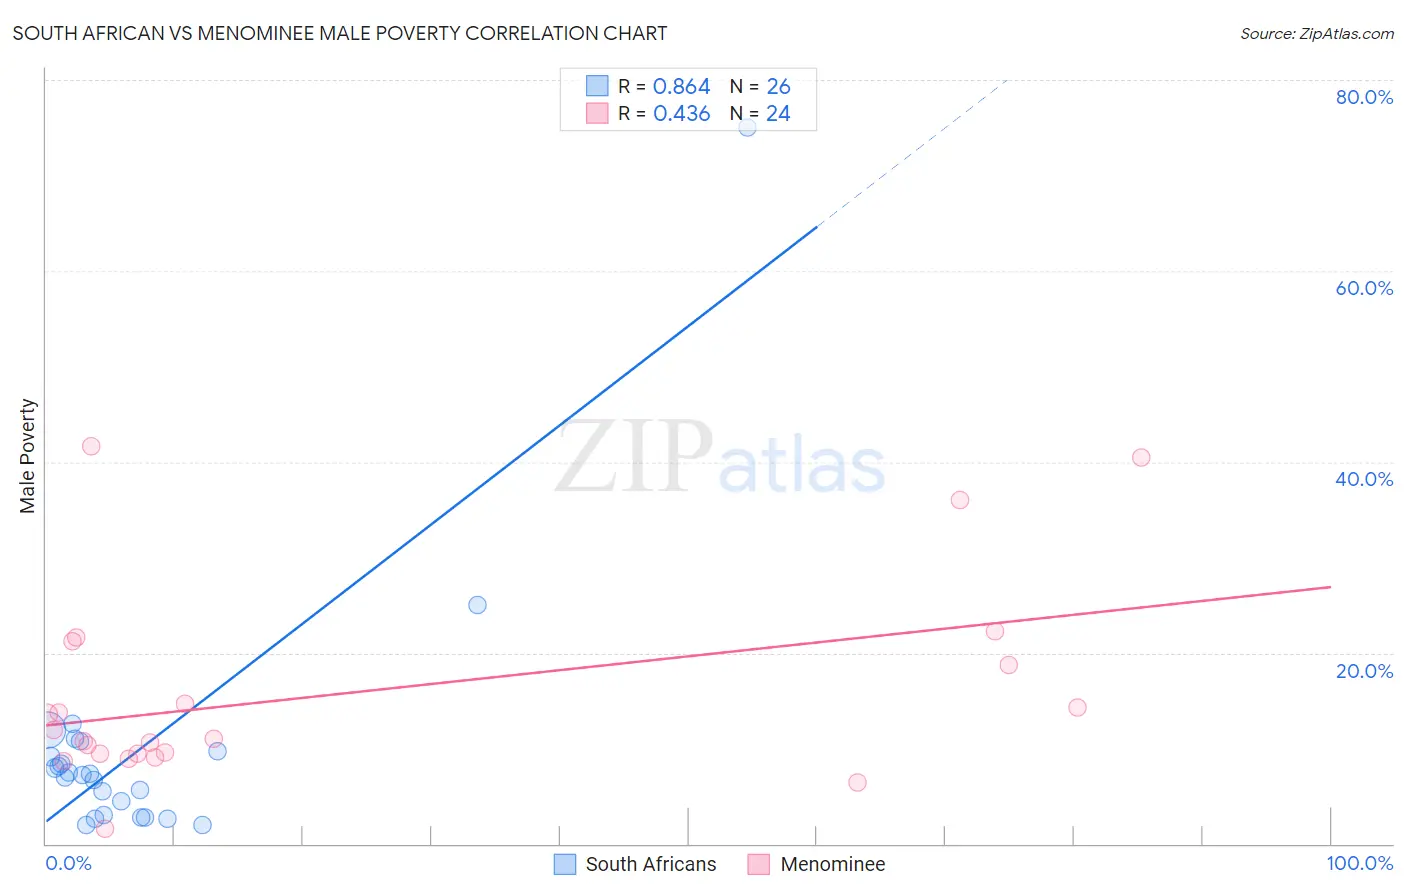 South African vs Menominee Male Poverty